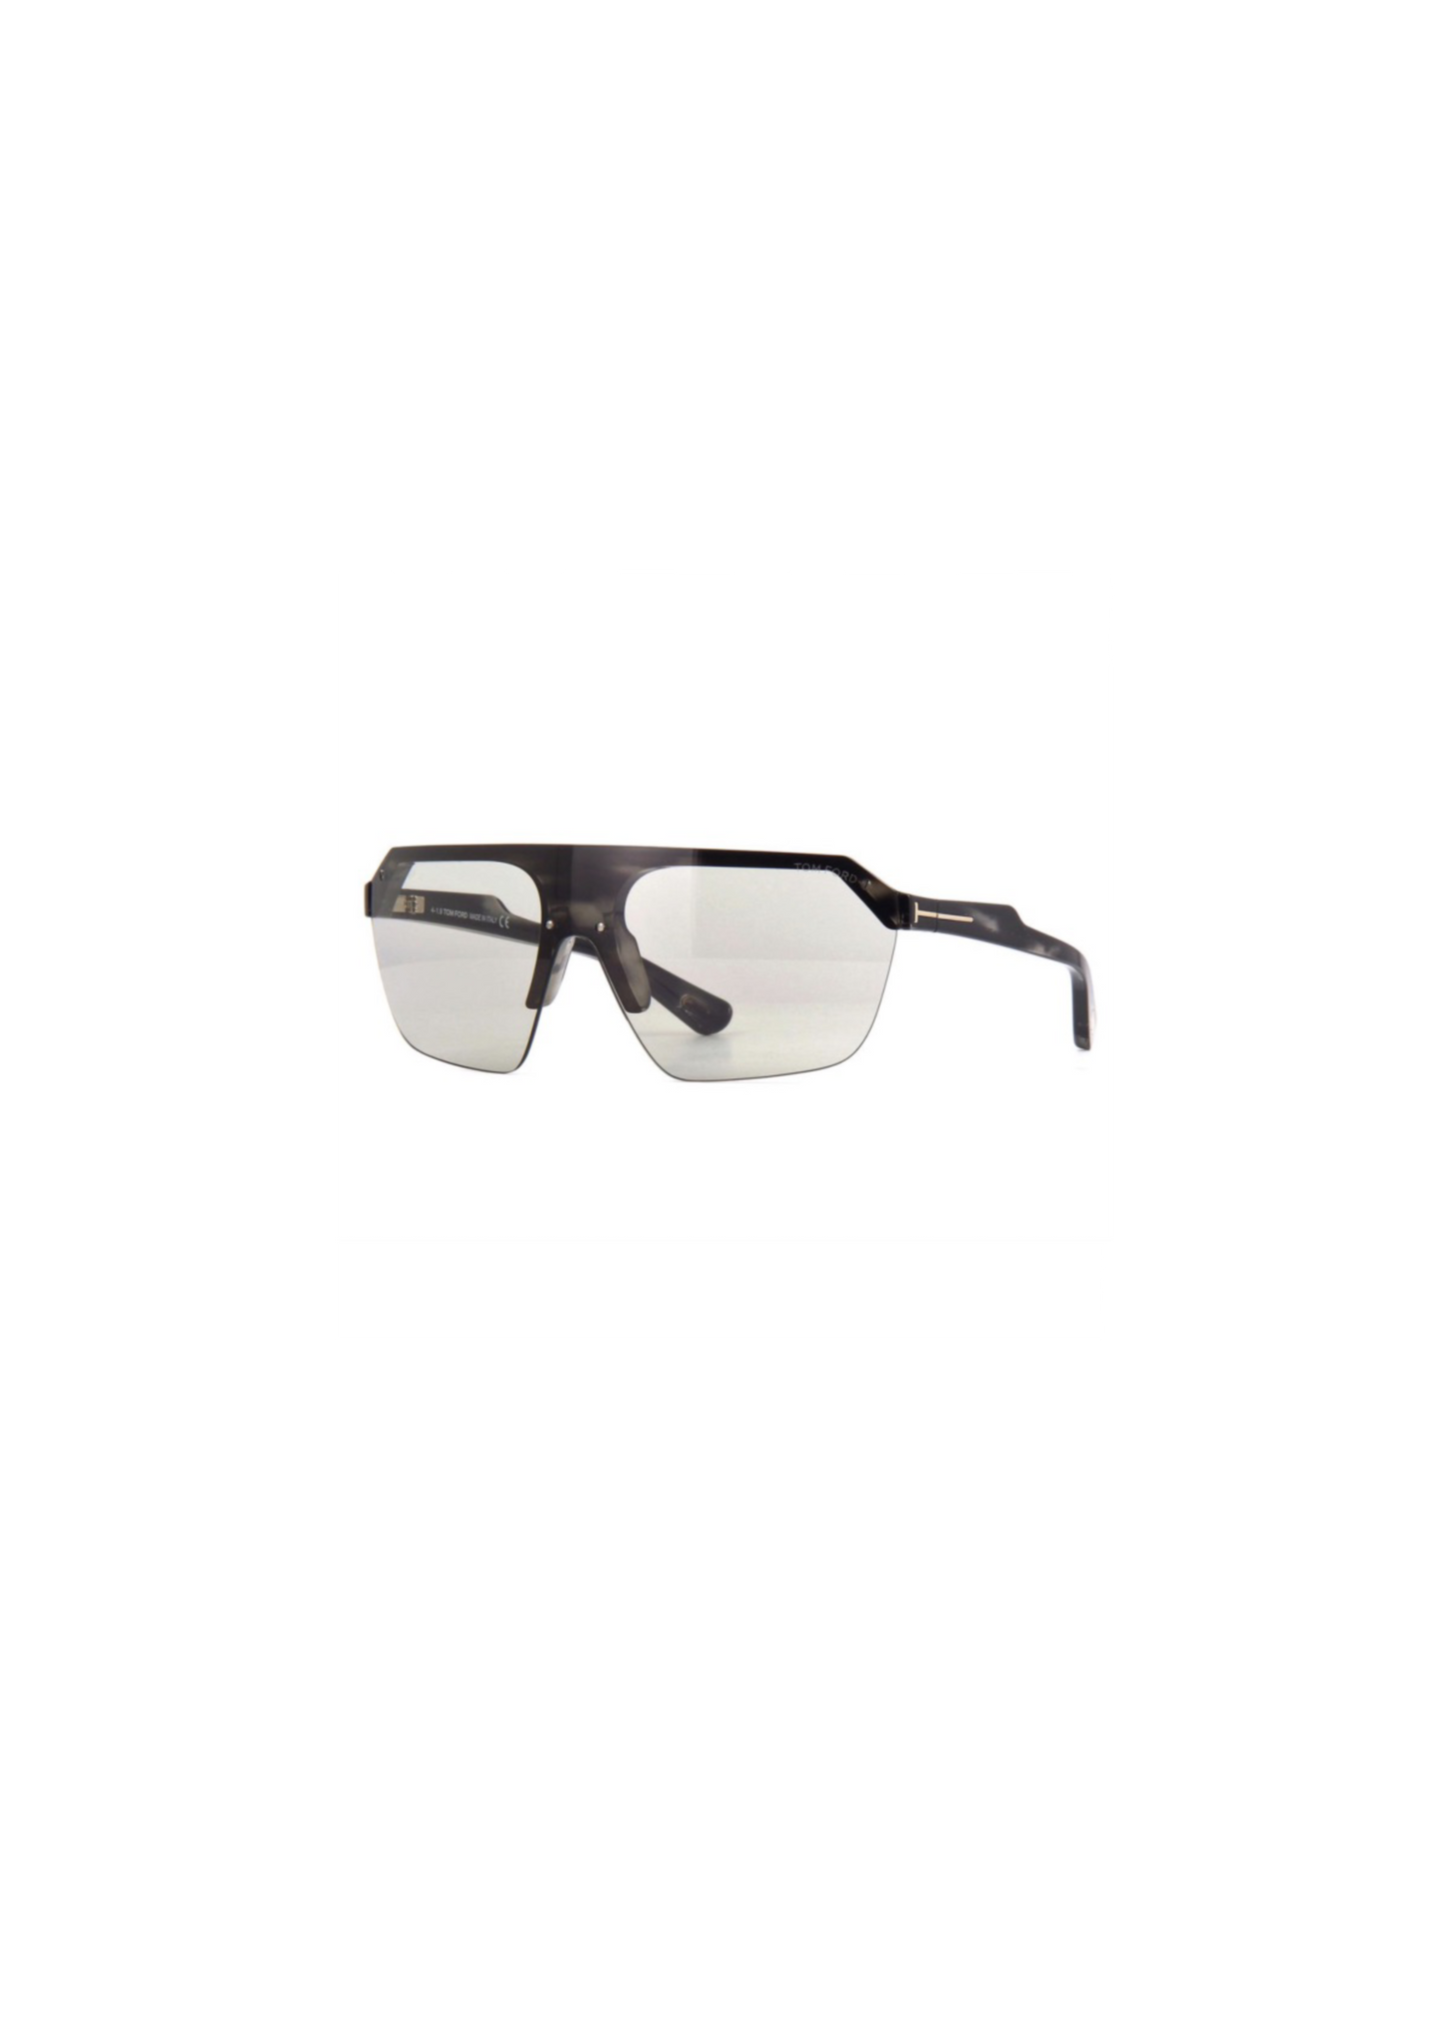 TOM FORD FT0797 56A 00   Main color: Brown Frame color: Brown Frame material: Plastic Lenses color: Grey Lenses material: Plastic Filter category: 1 Style: Mono Lens Protection: 100% UVA & UVB Size: 68-03-130 Lenses width: 68 Millimeter Lenses height: 55 Millimeter Frame width: 150 Millimeter Temples length: 130 Millimeter Spring hinge: No Shipment includes : Case, cleaning cloth 